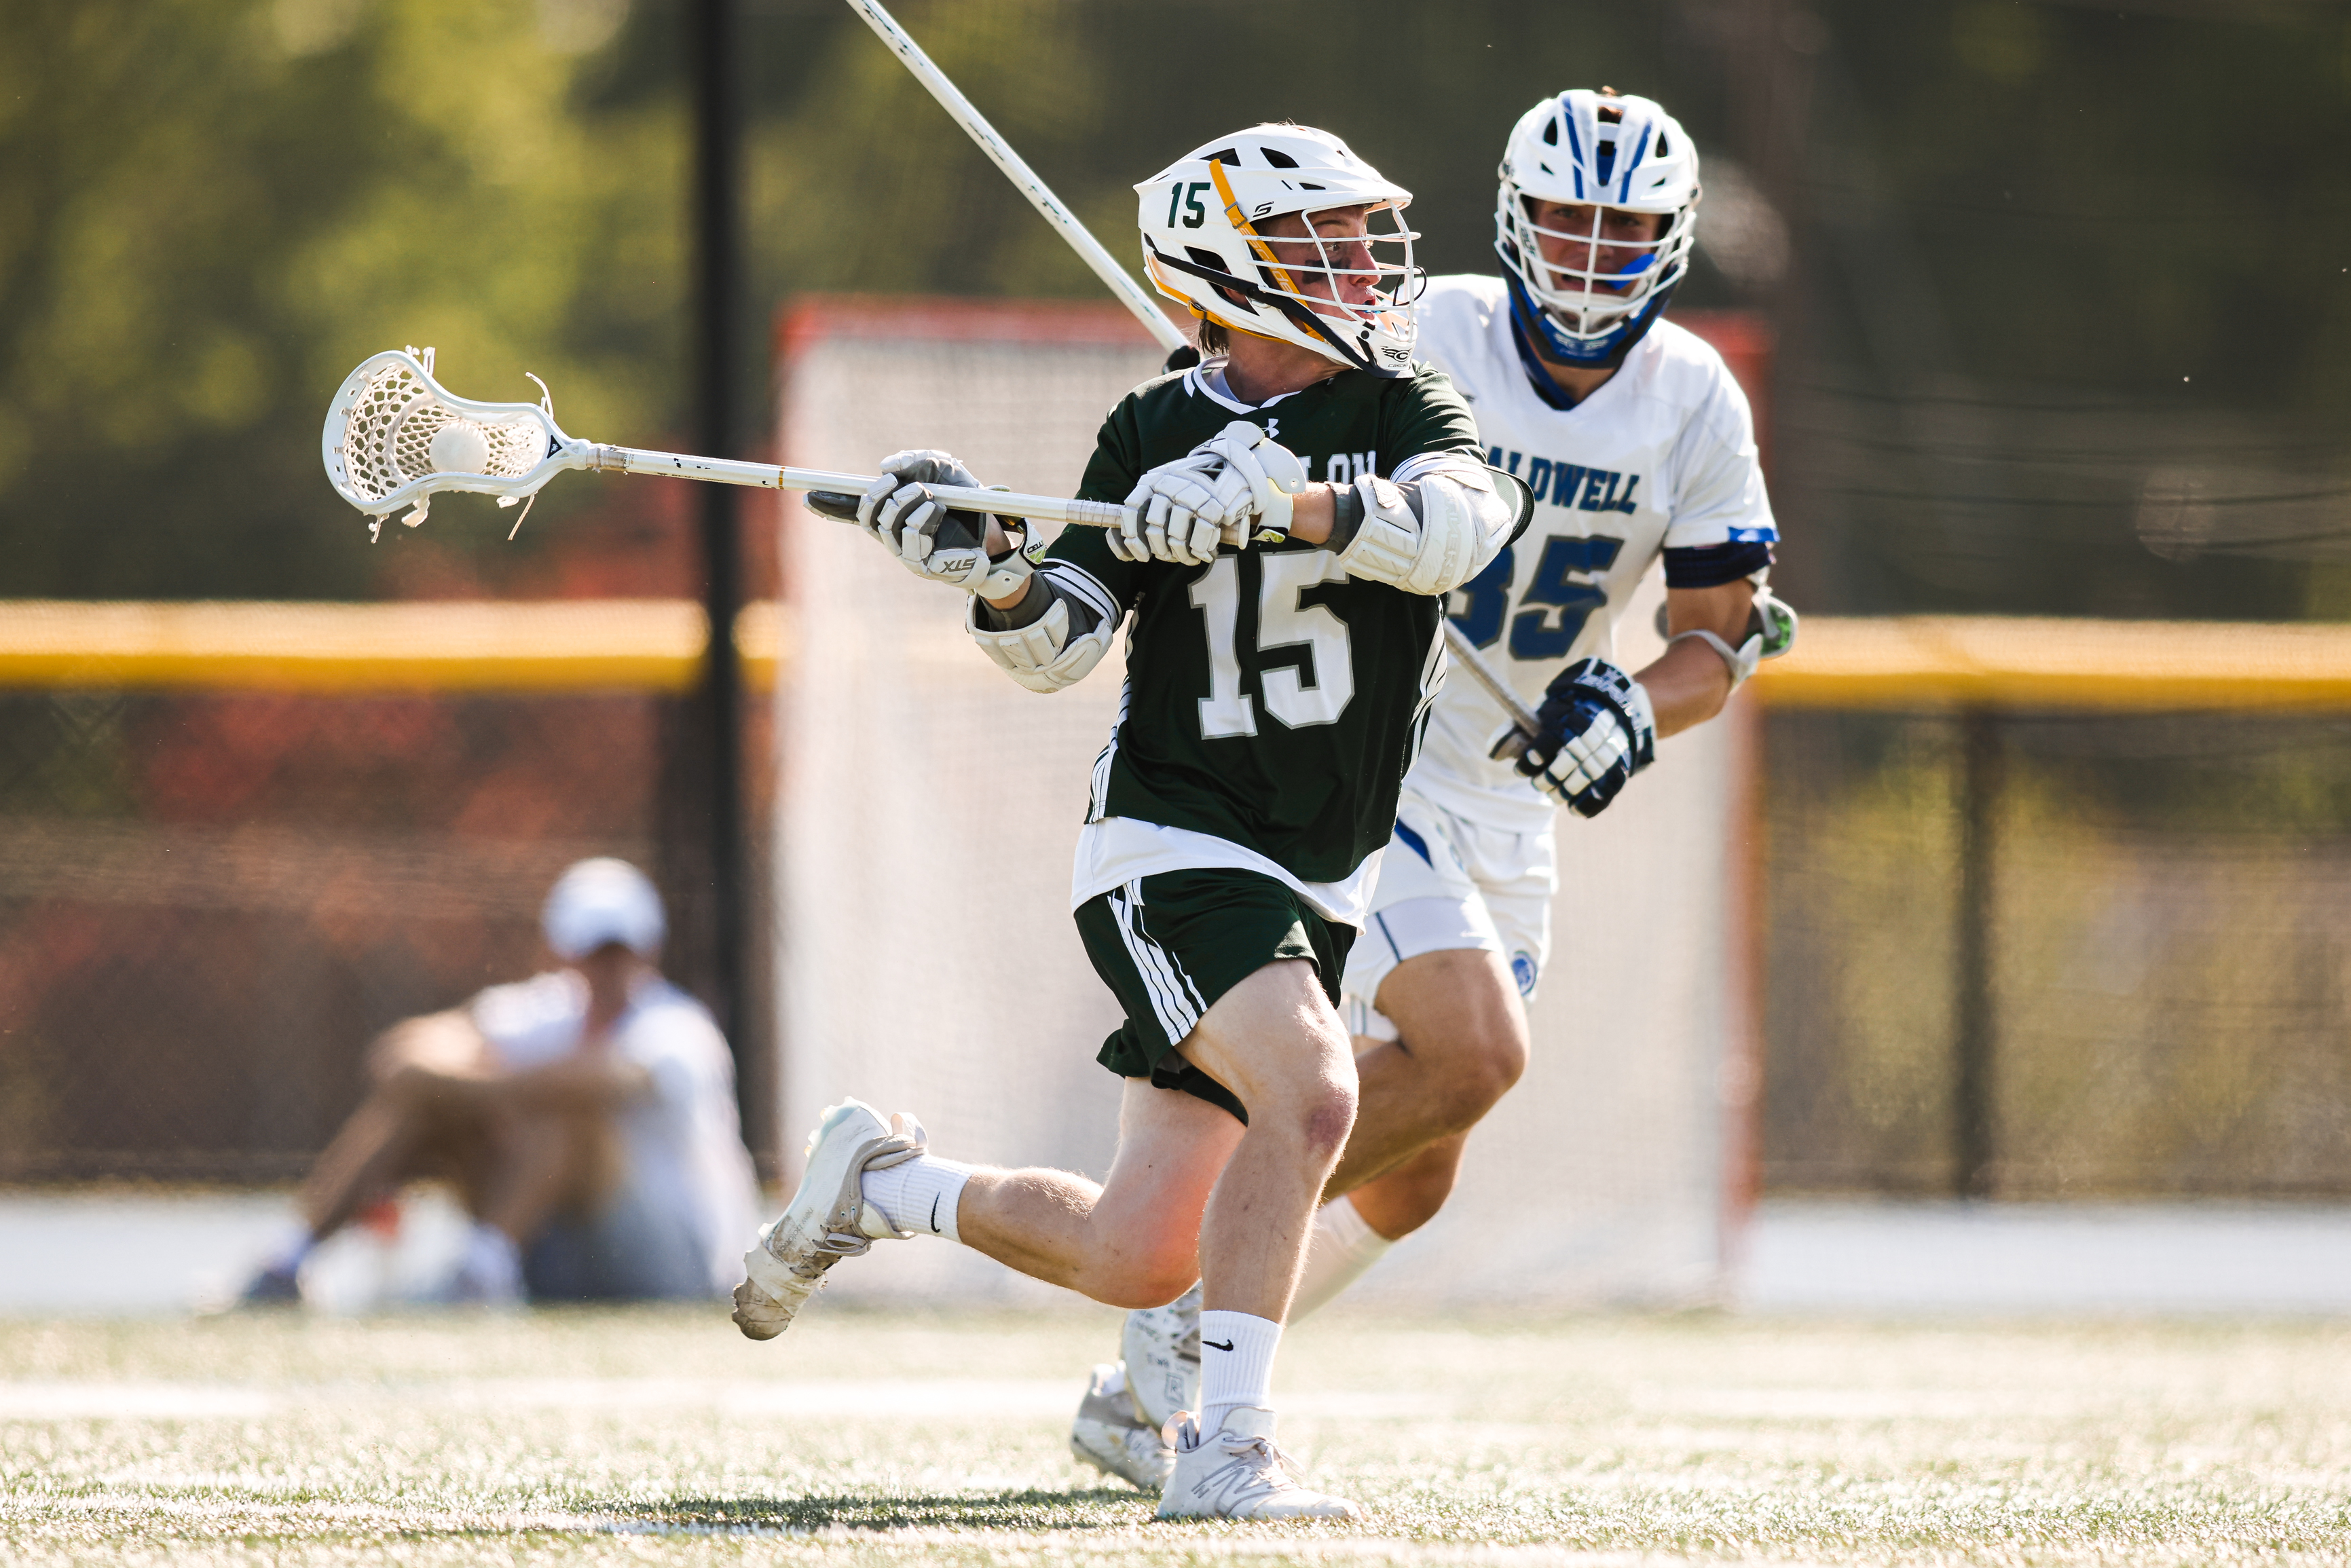 At Middlebury, Canton's Robbie Donahoe is a hit with the sticks